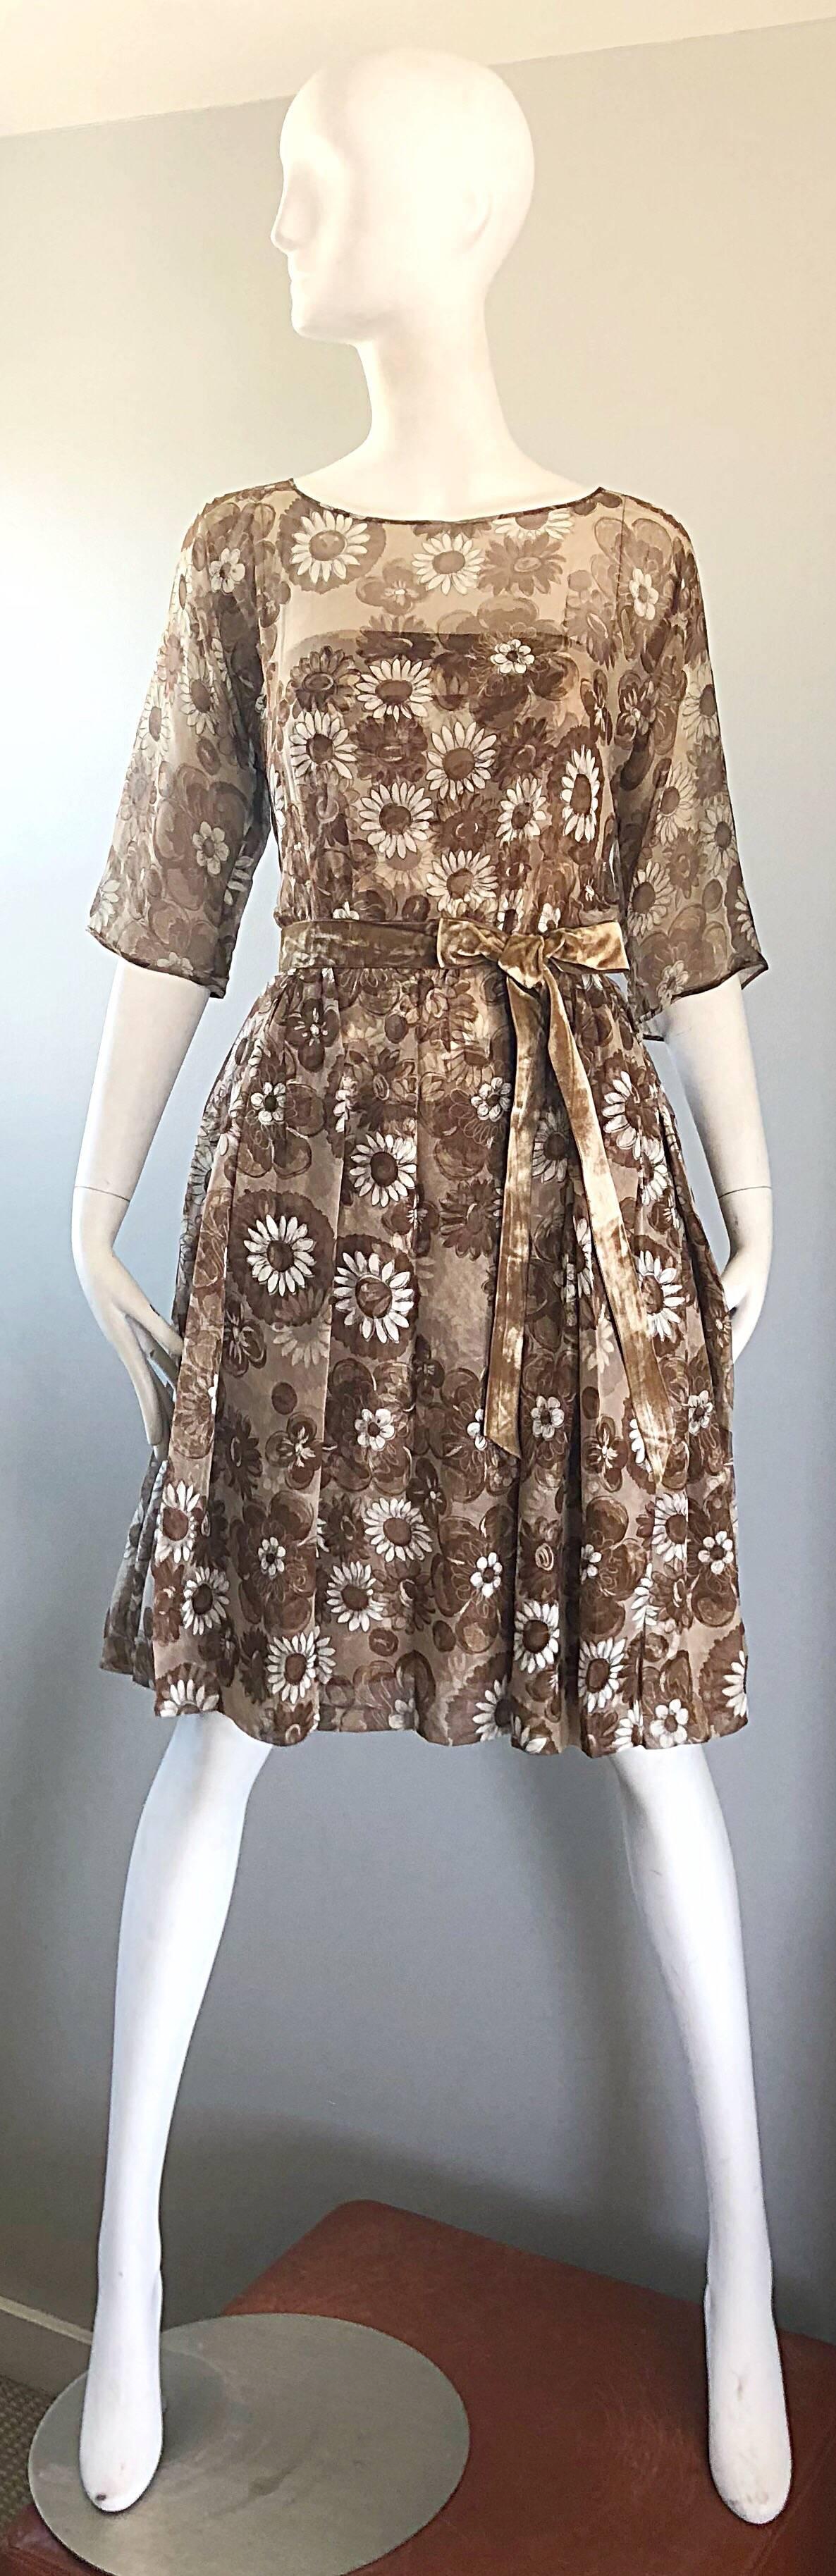 Gorgeous 50s SAKS 5th AVE. demi couture beige + taupe + ivory silk chiffon daisy print floral cocktail dress! Features a silk strapless dress, with an attached chiffon 3/4 sleeves overlay with attached silk velvet bow belt. Words cannot express both